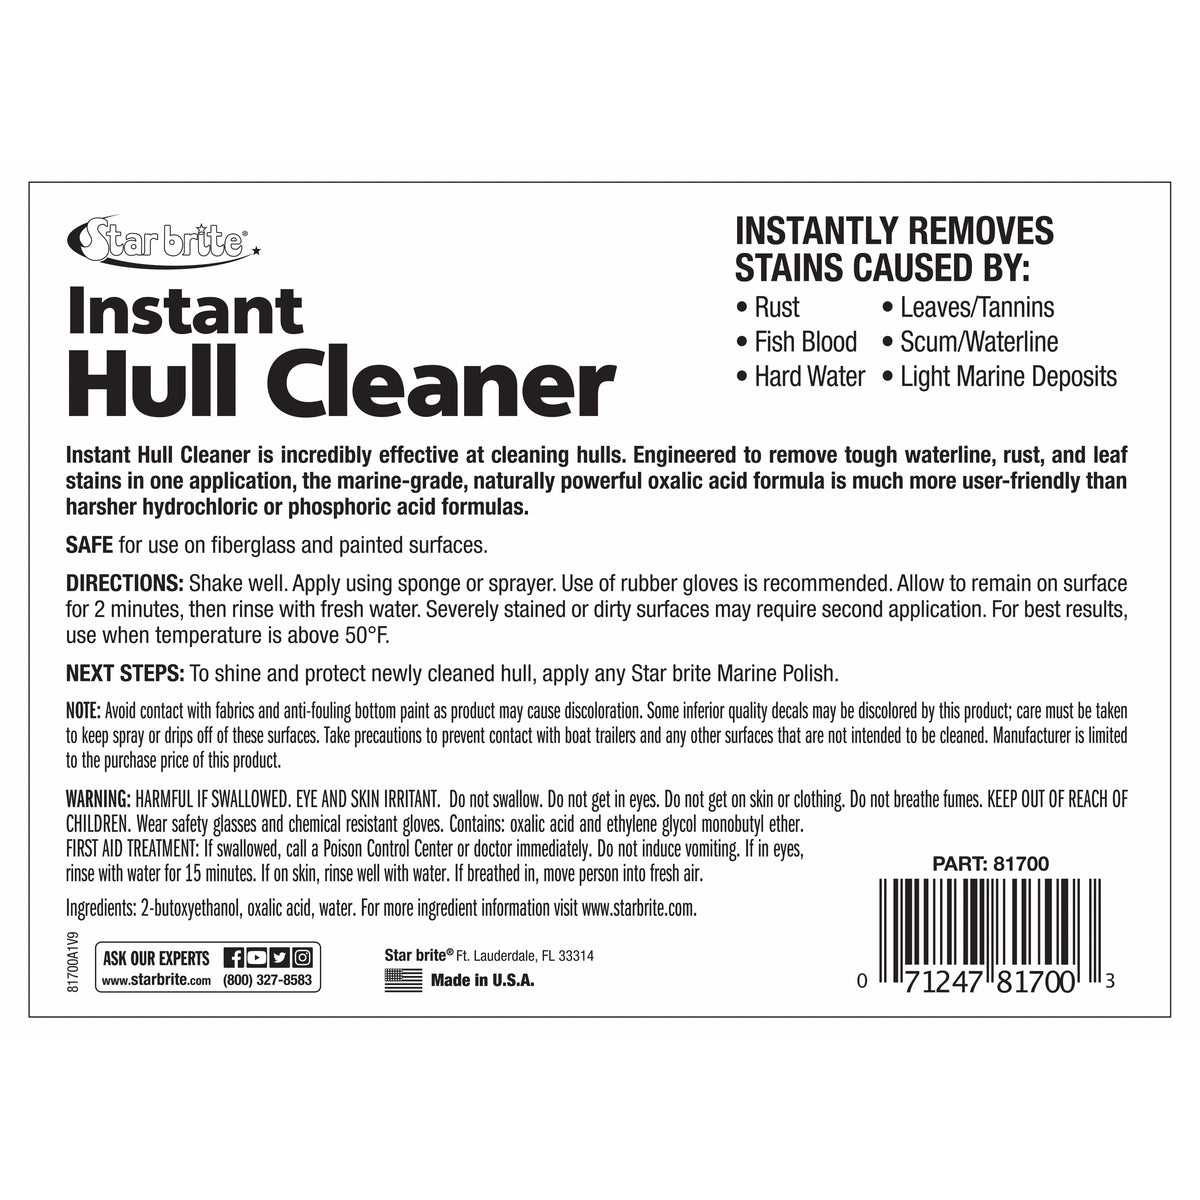 Star Brite Qualifies for Free Shipping Star Brite Hull Cleaner Gallon #081700N